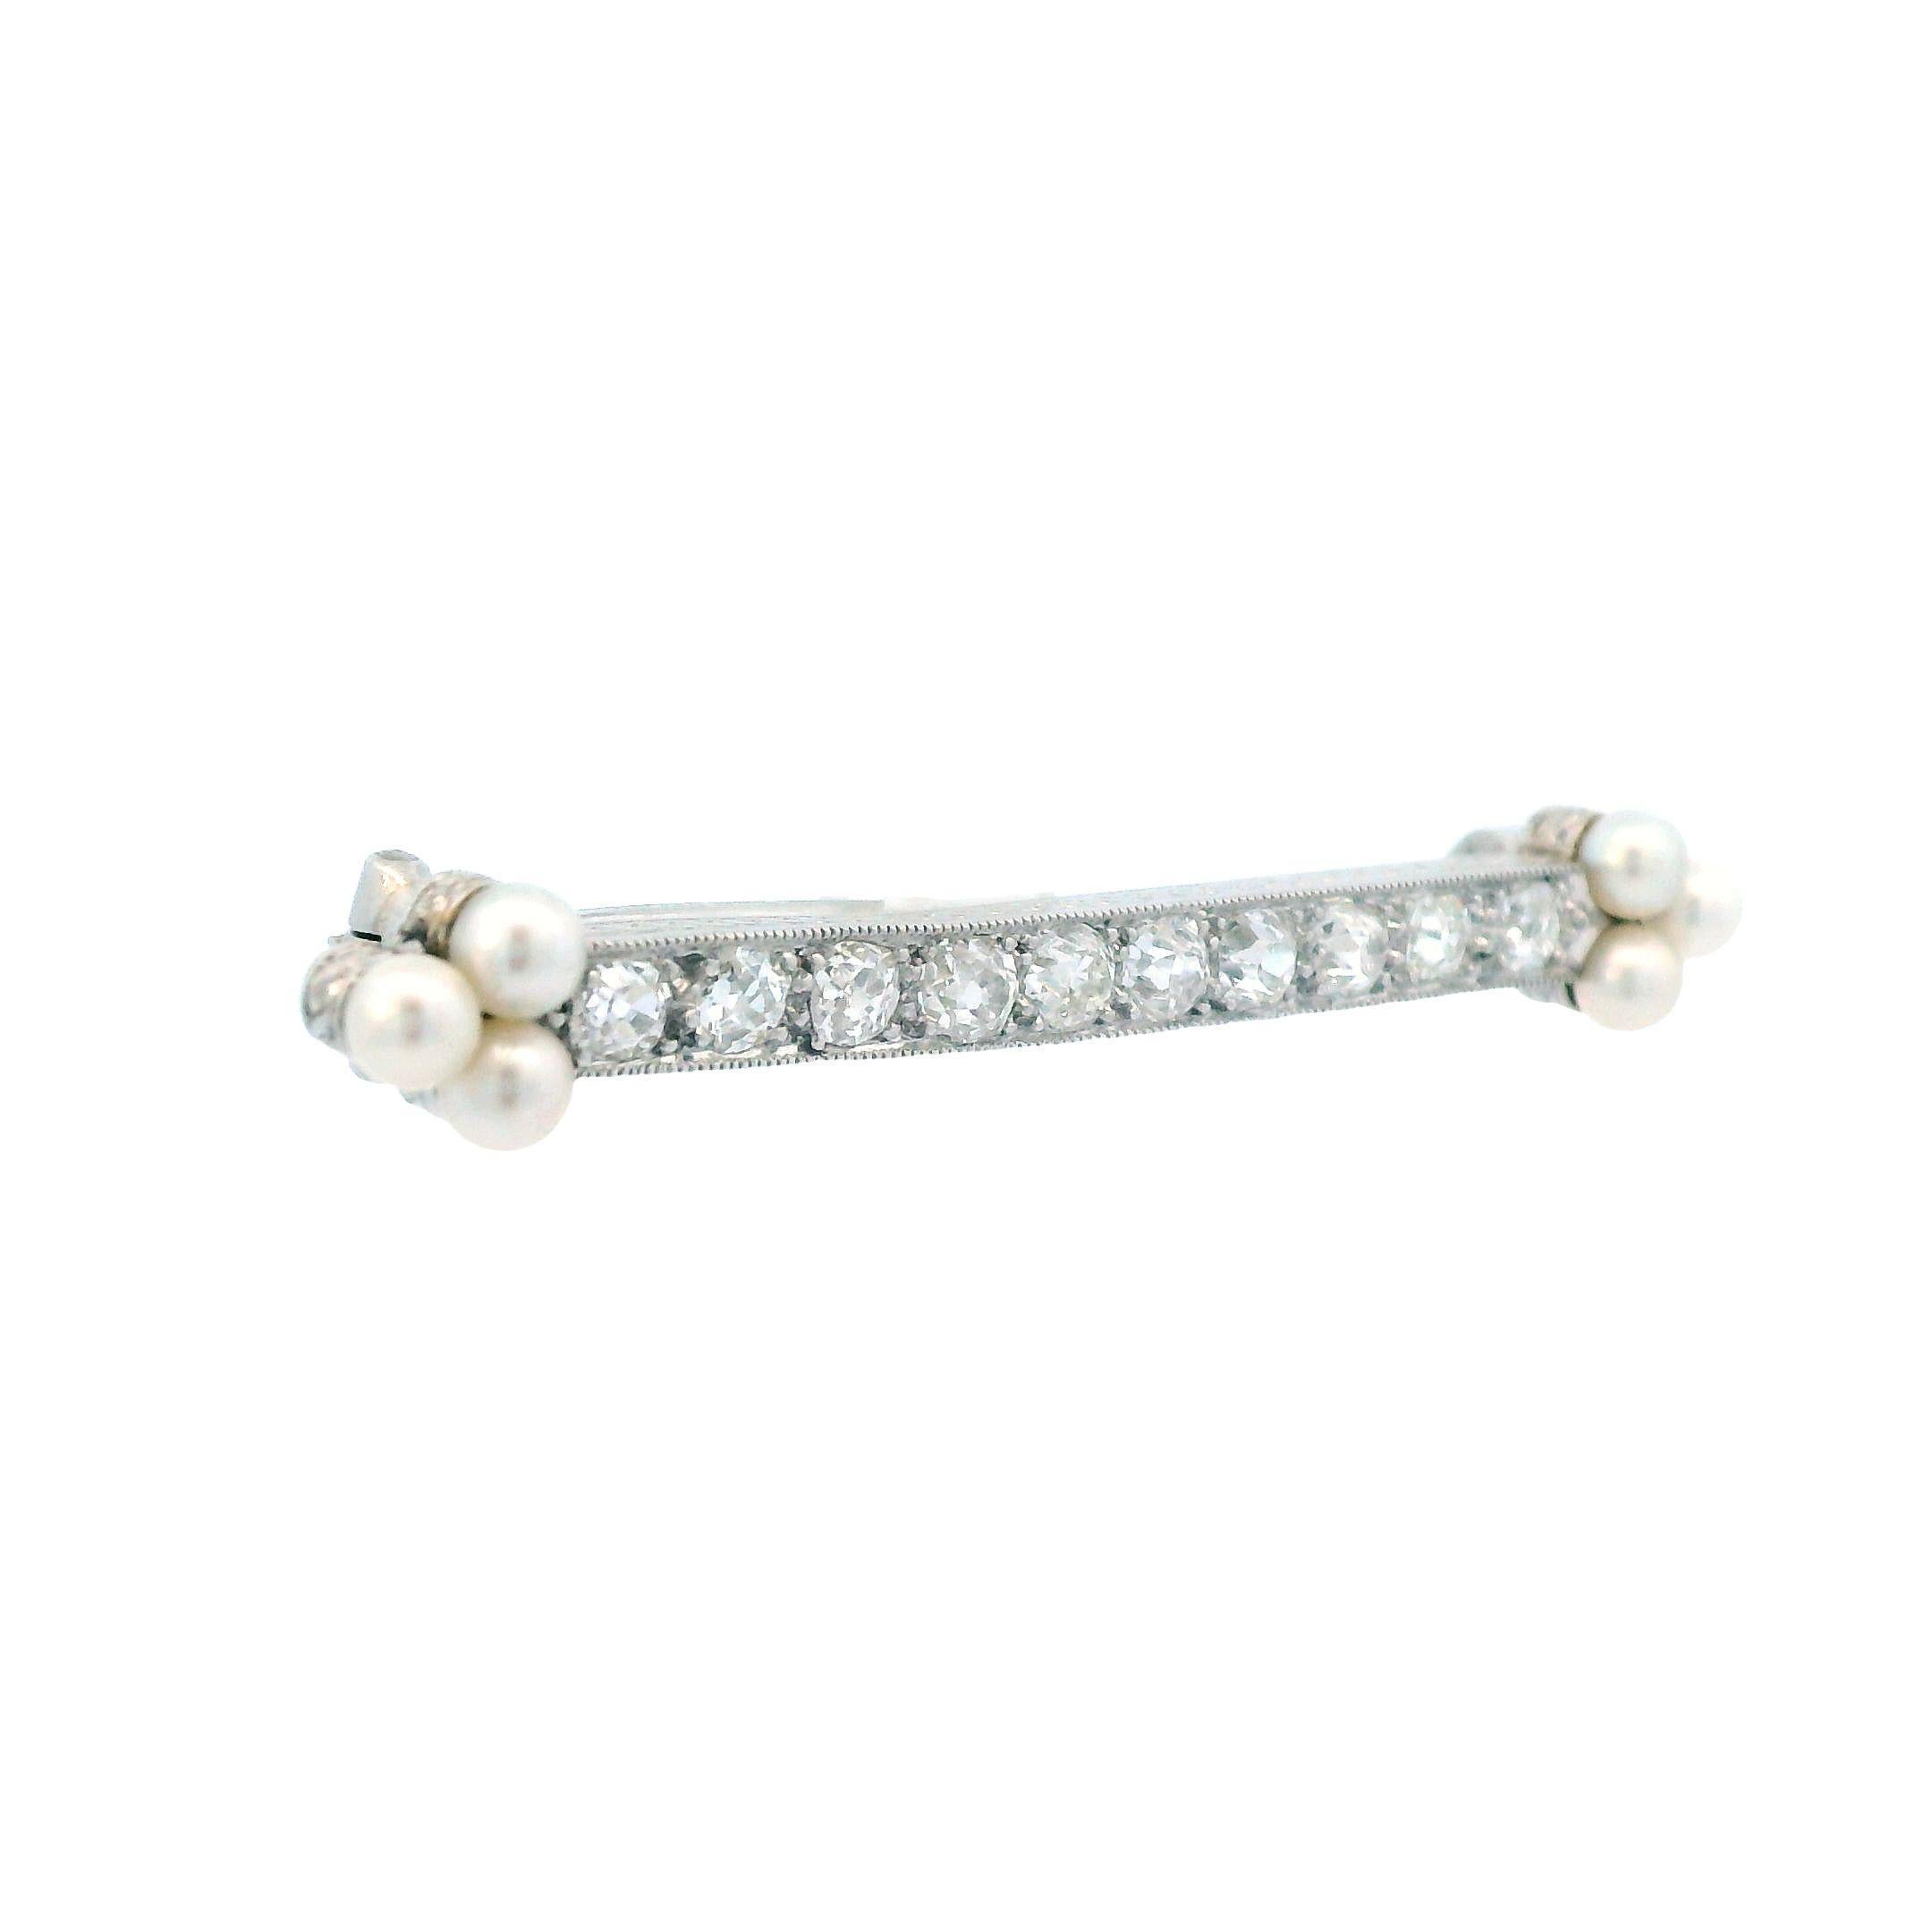 Women's 1910 Edwardian Platinum Diamond and Pearl Brooch For Sale